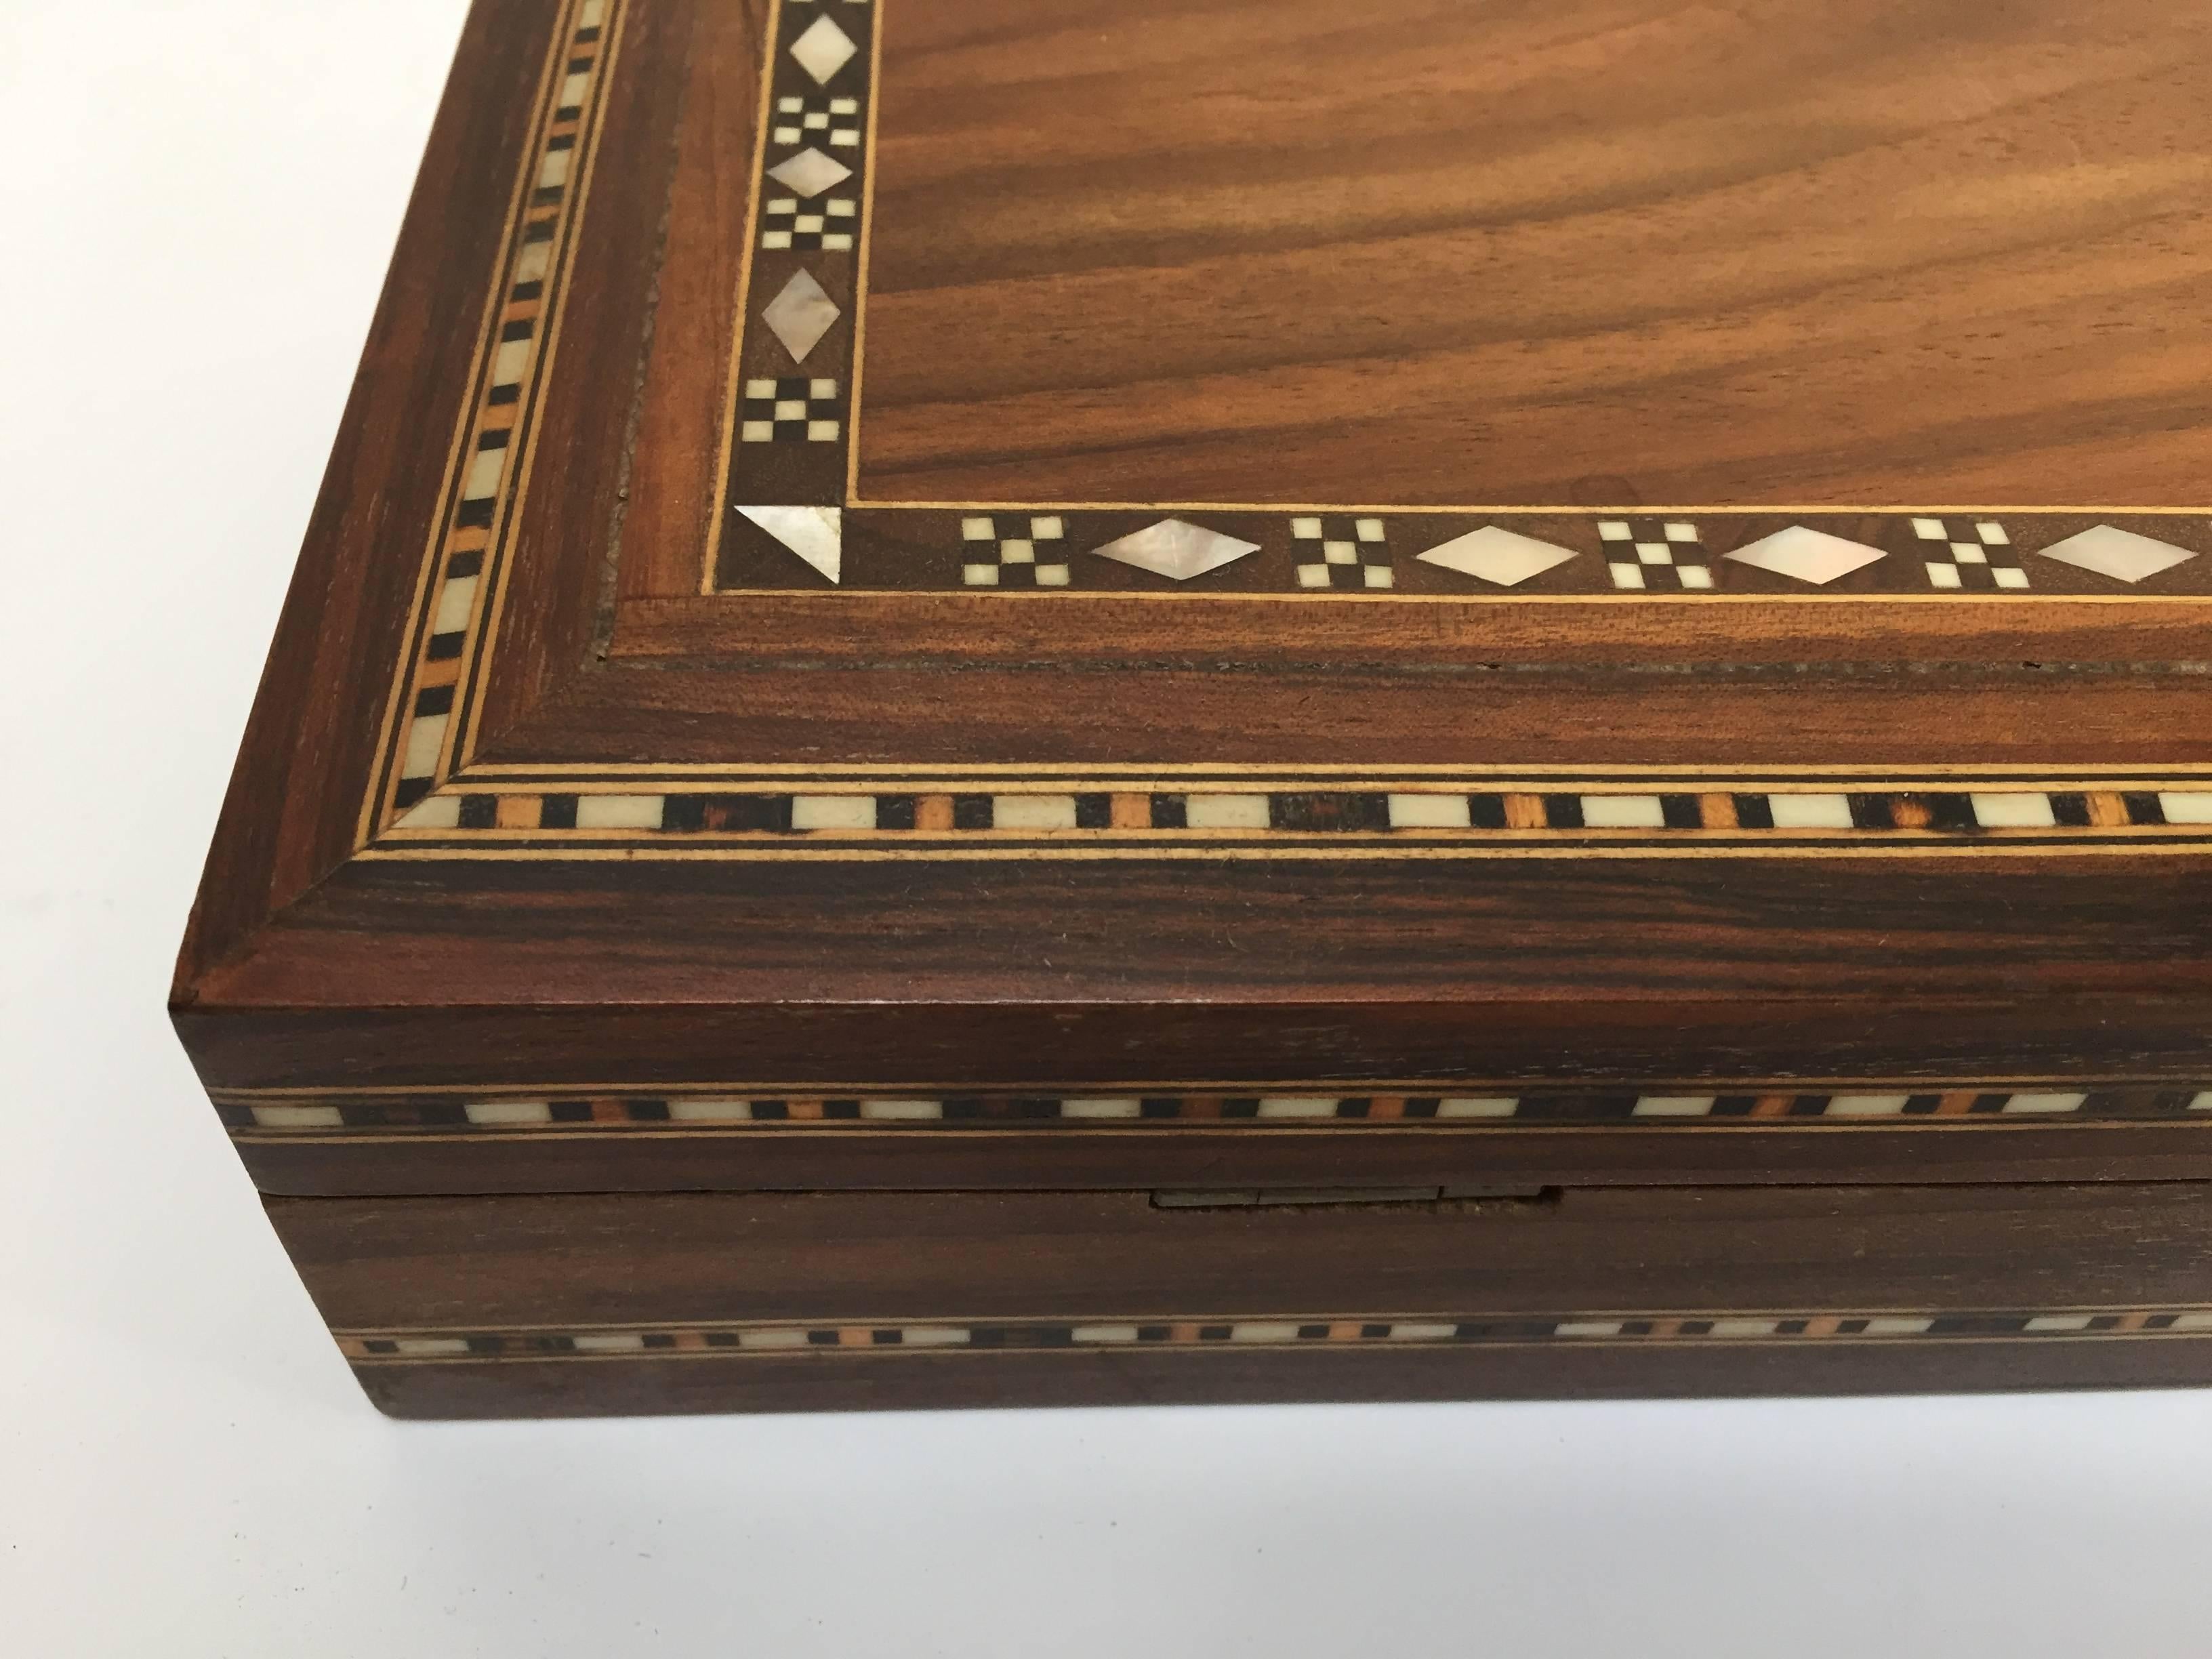 Large Middle Eastern  precious wood decorative box inlay with fruitwood and mother-of-pearl and lined with red velvet.
Very elegant and Classic handcrafted in Damascus Syria by skilled artisans, great jewelry or treasure box.
 